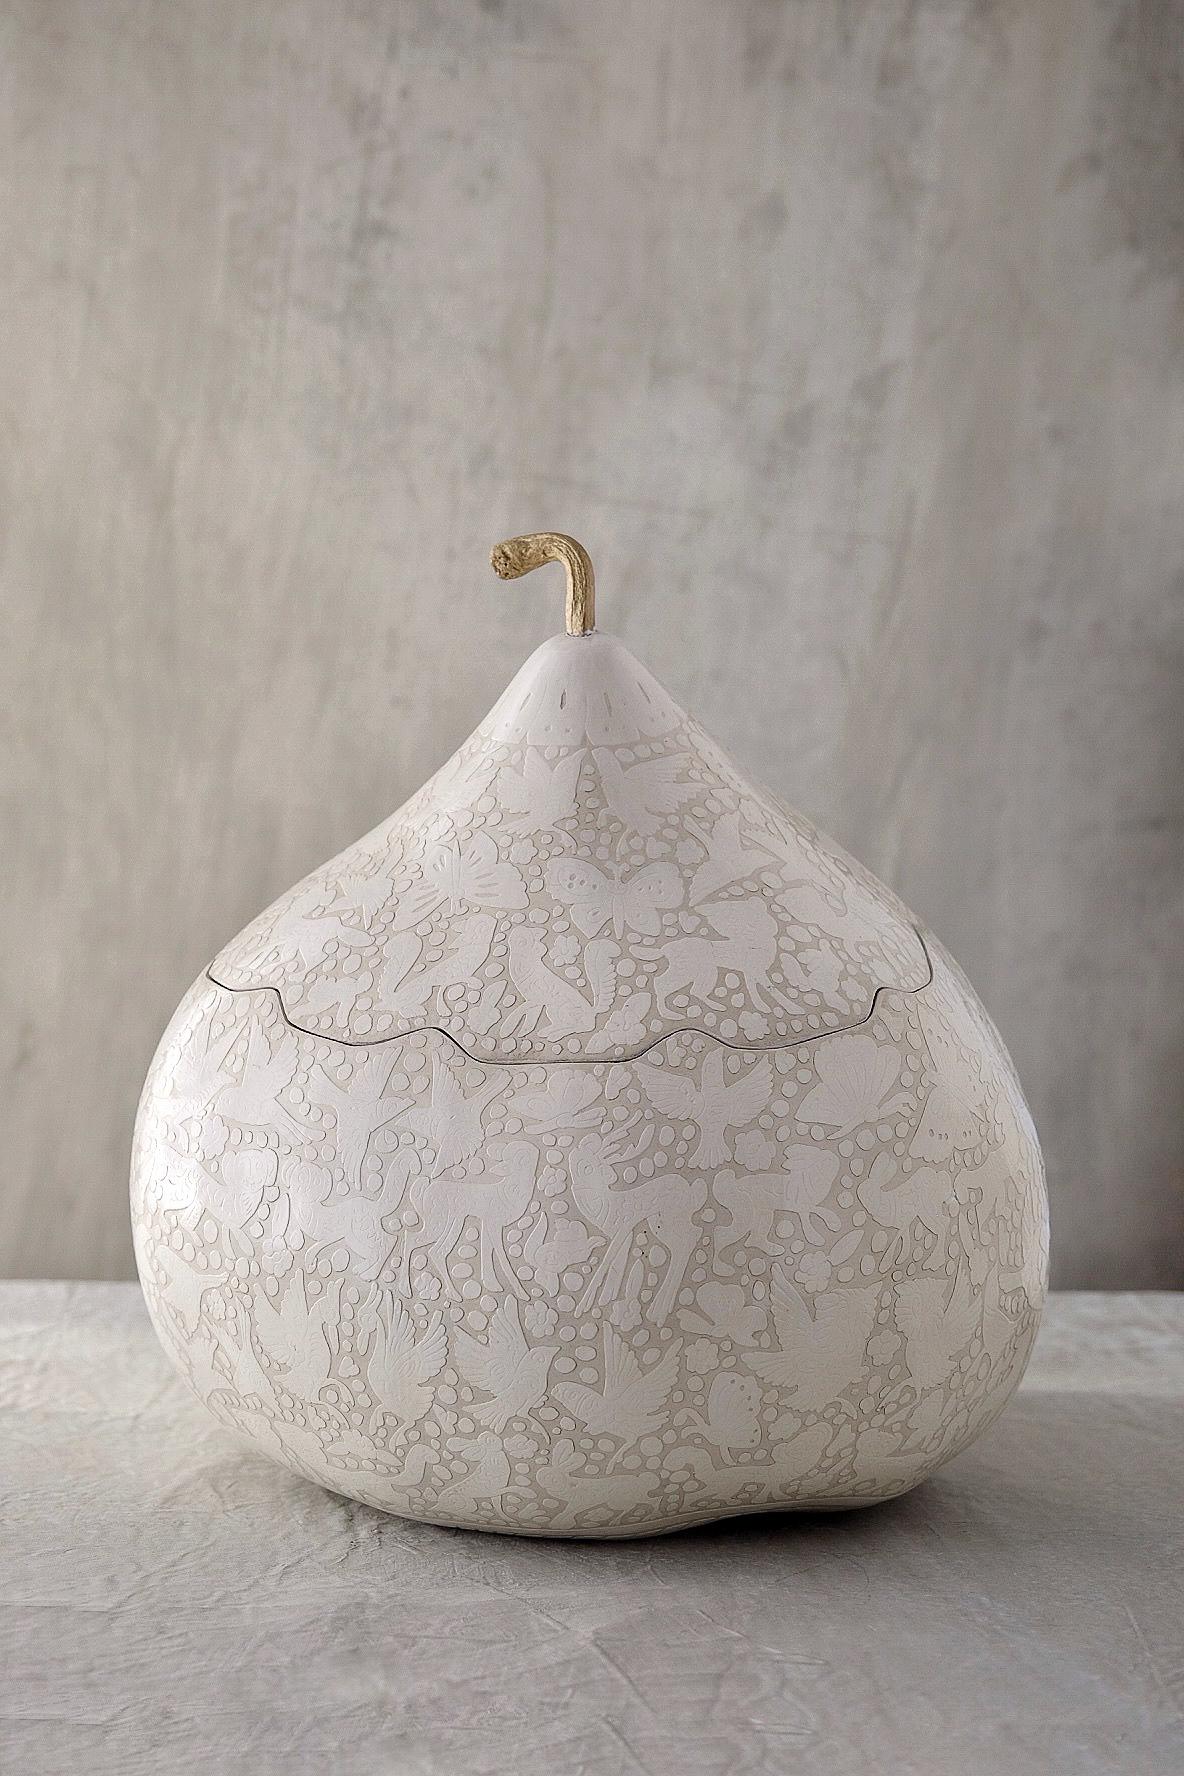 Guaje Oli Gourd by Onora
Dimensions: 37 x 25 cm
Materials: Gourd, Natural pigments mixed with chia oil and then hand burnished with river stones
Guaje is a fruit, each piece has a different size. 

Hand lacquered gourds have a long and rich